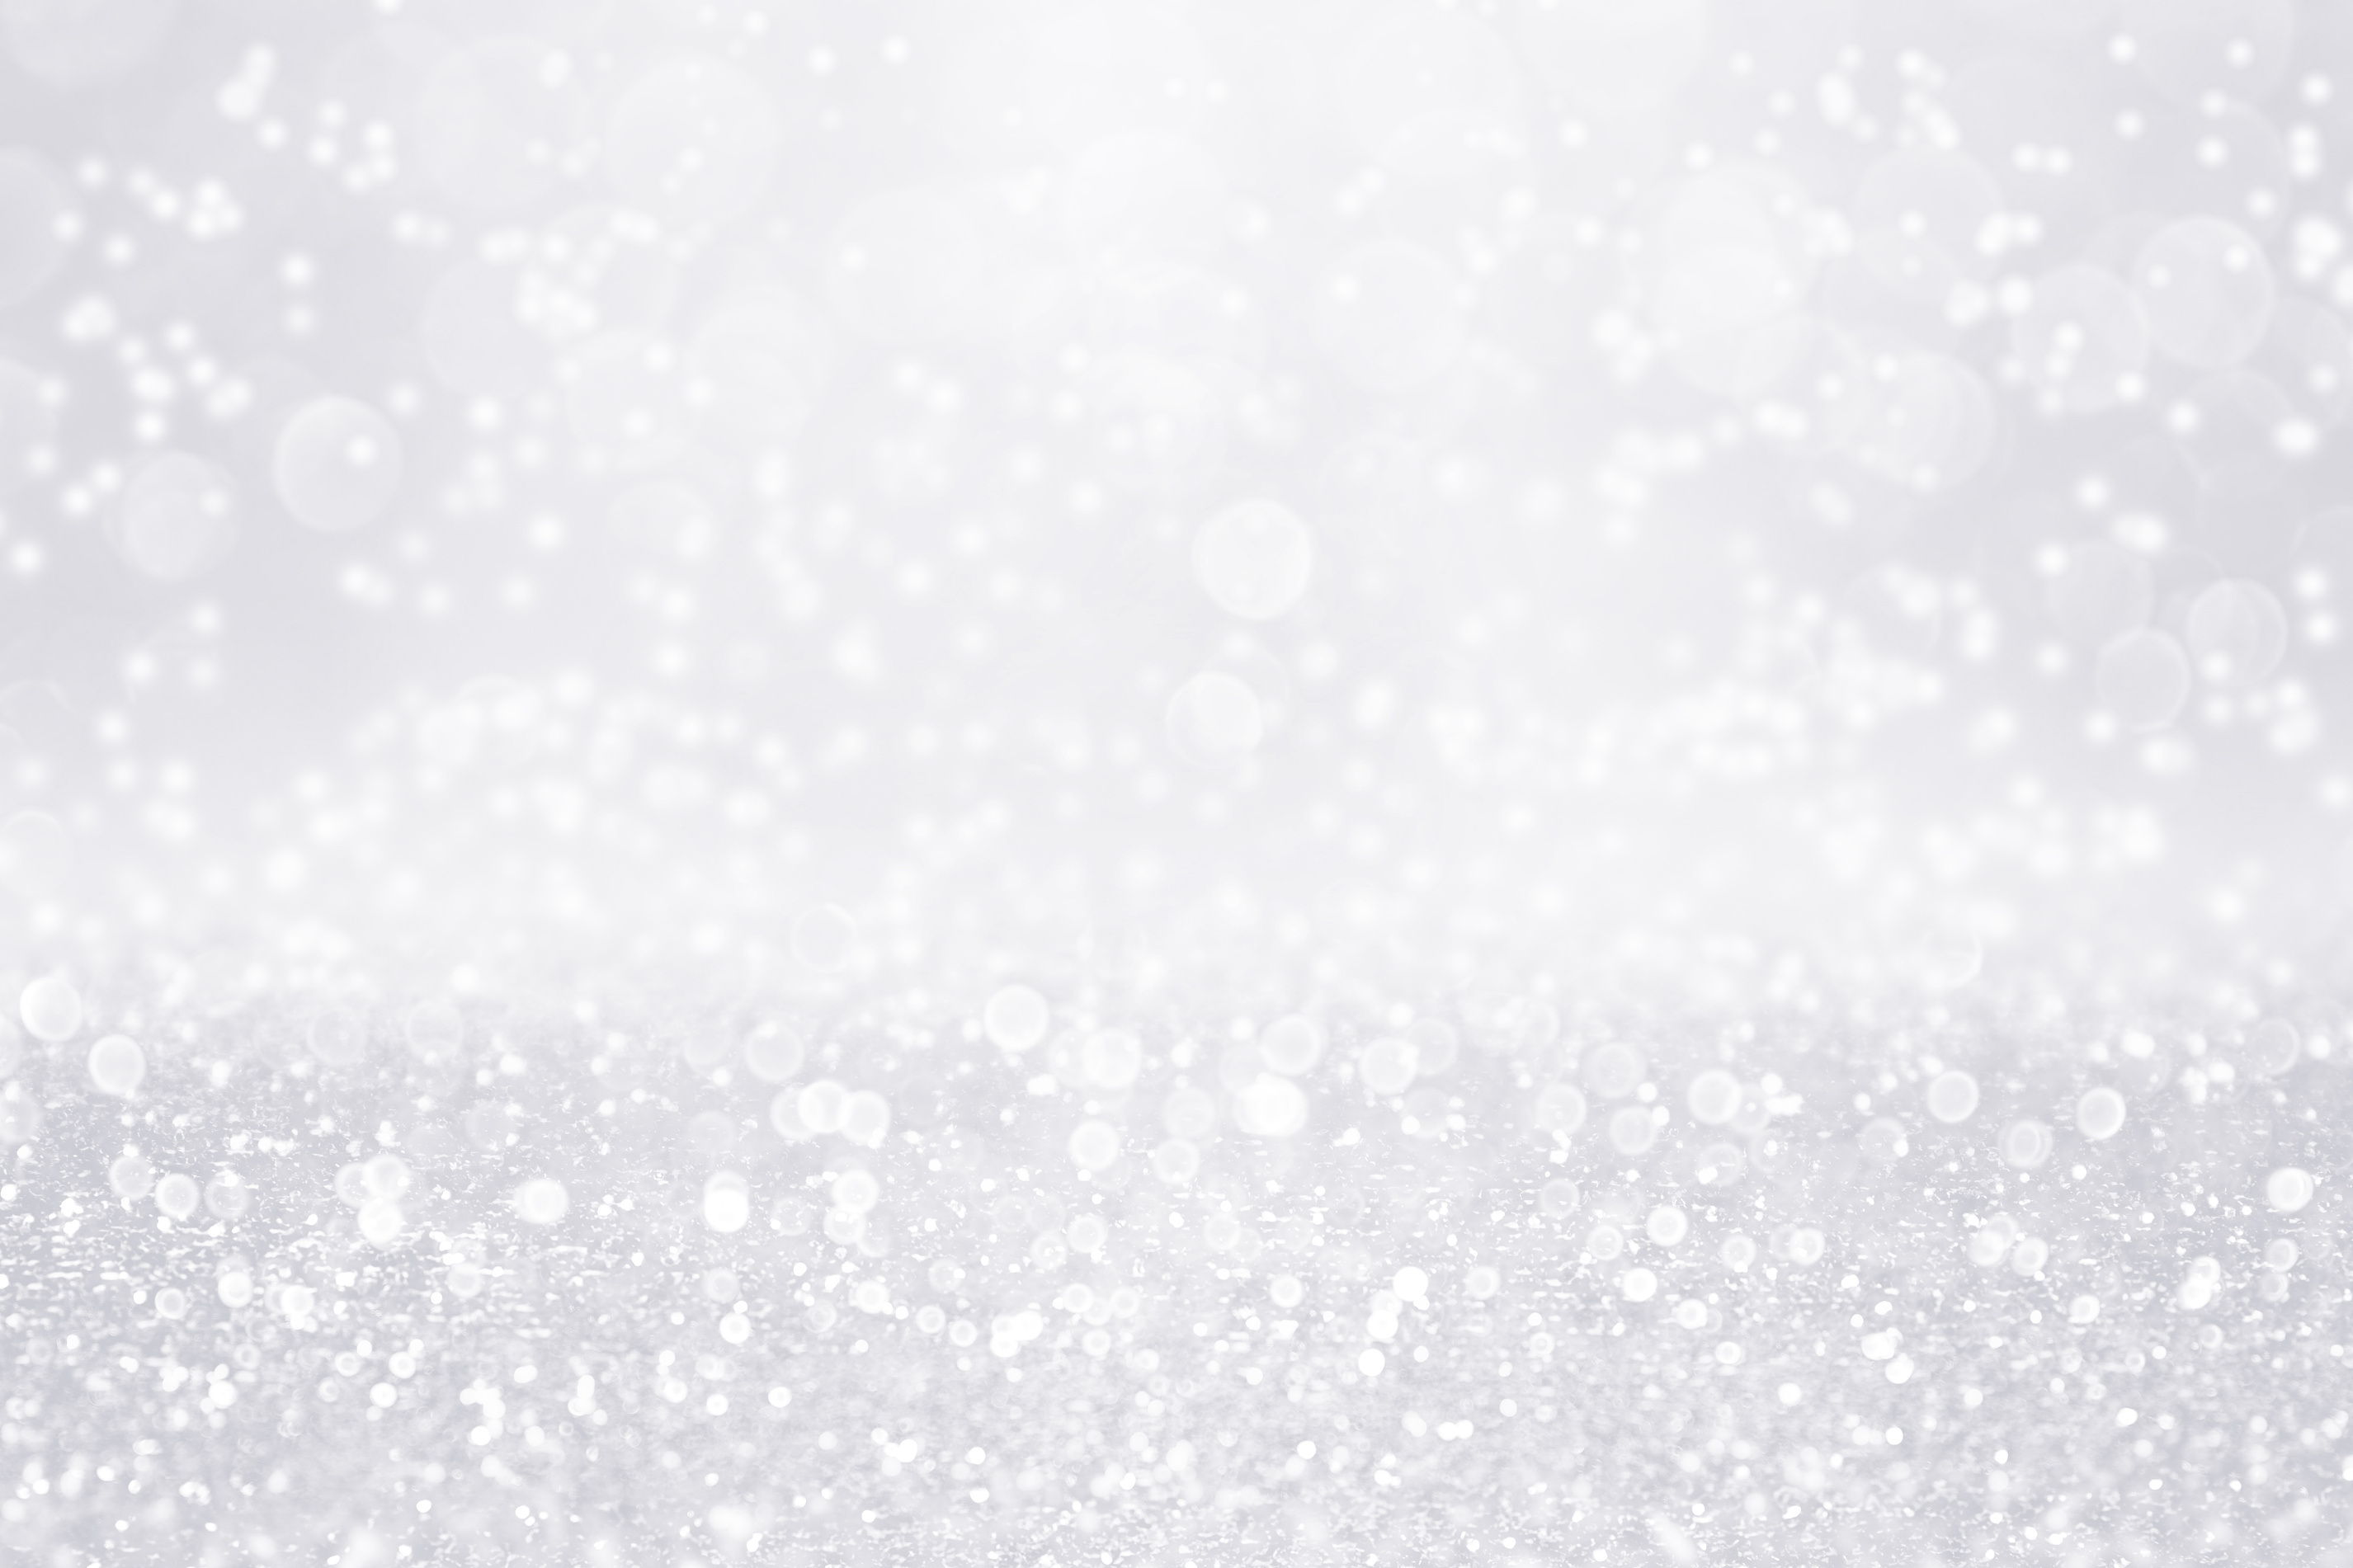 Silver White Glitter Background for Snow or Anniversary Diamonds Sparkle and Glam Sparkley